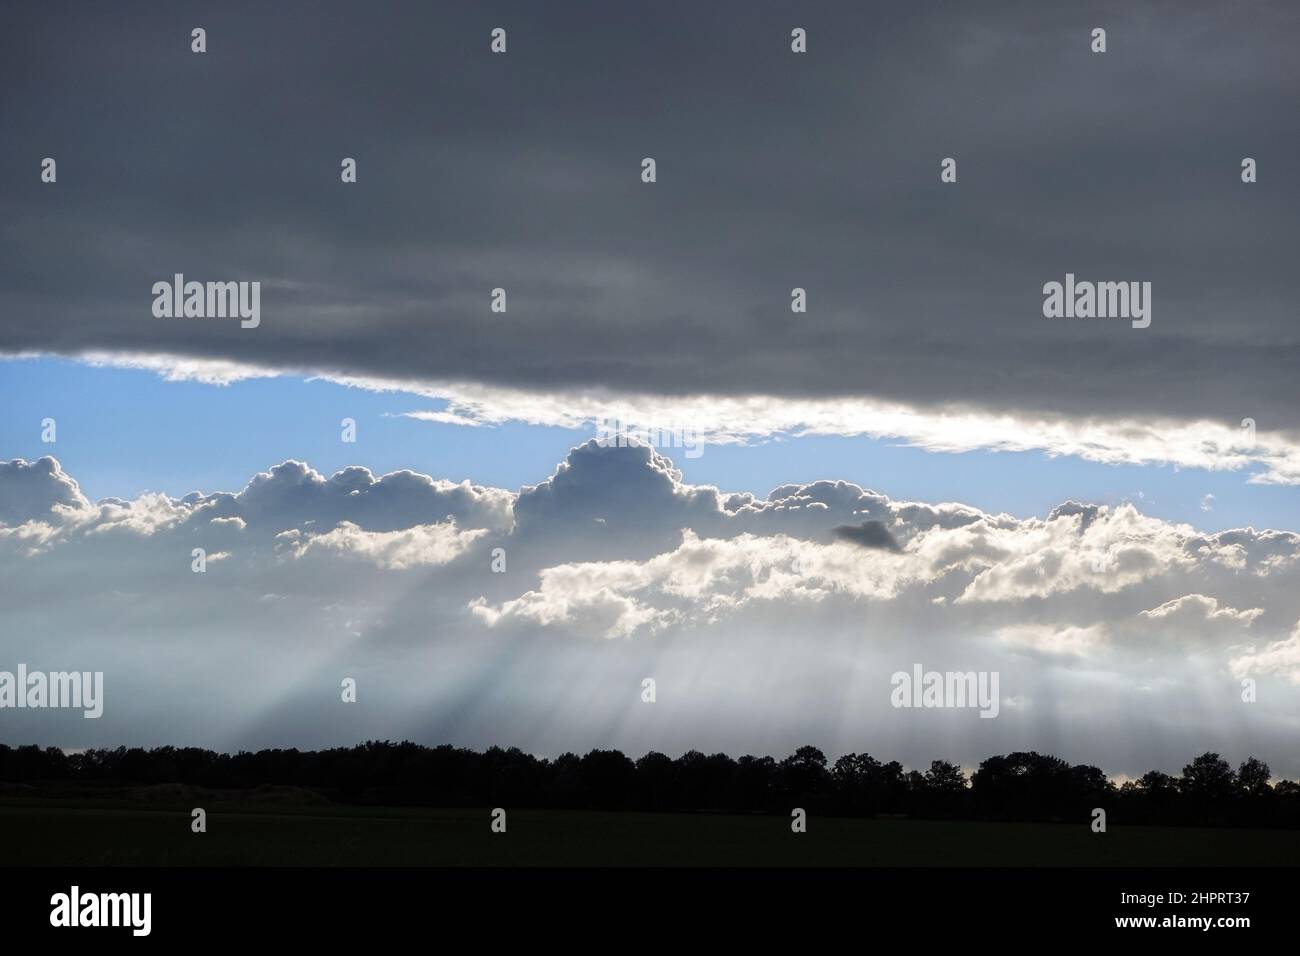 Sky with dark clouds and light streaks Stock Photo